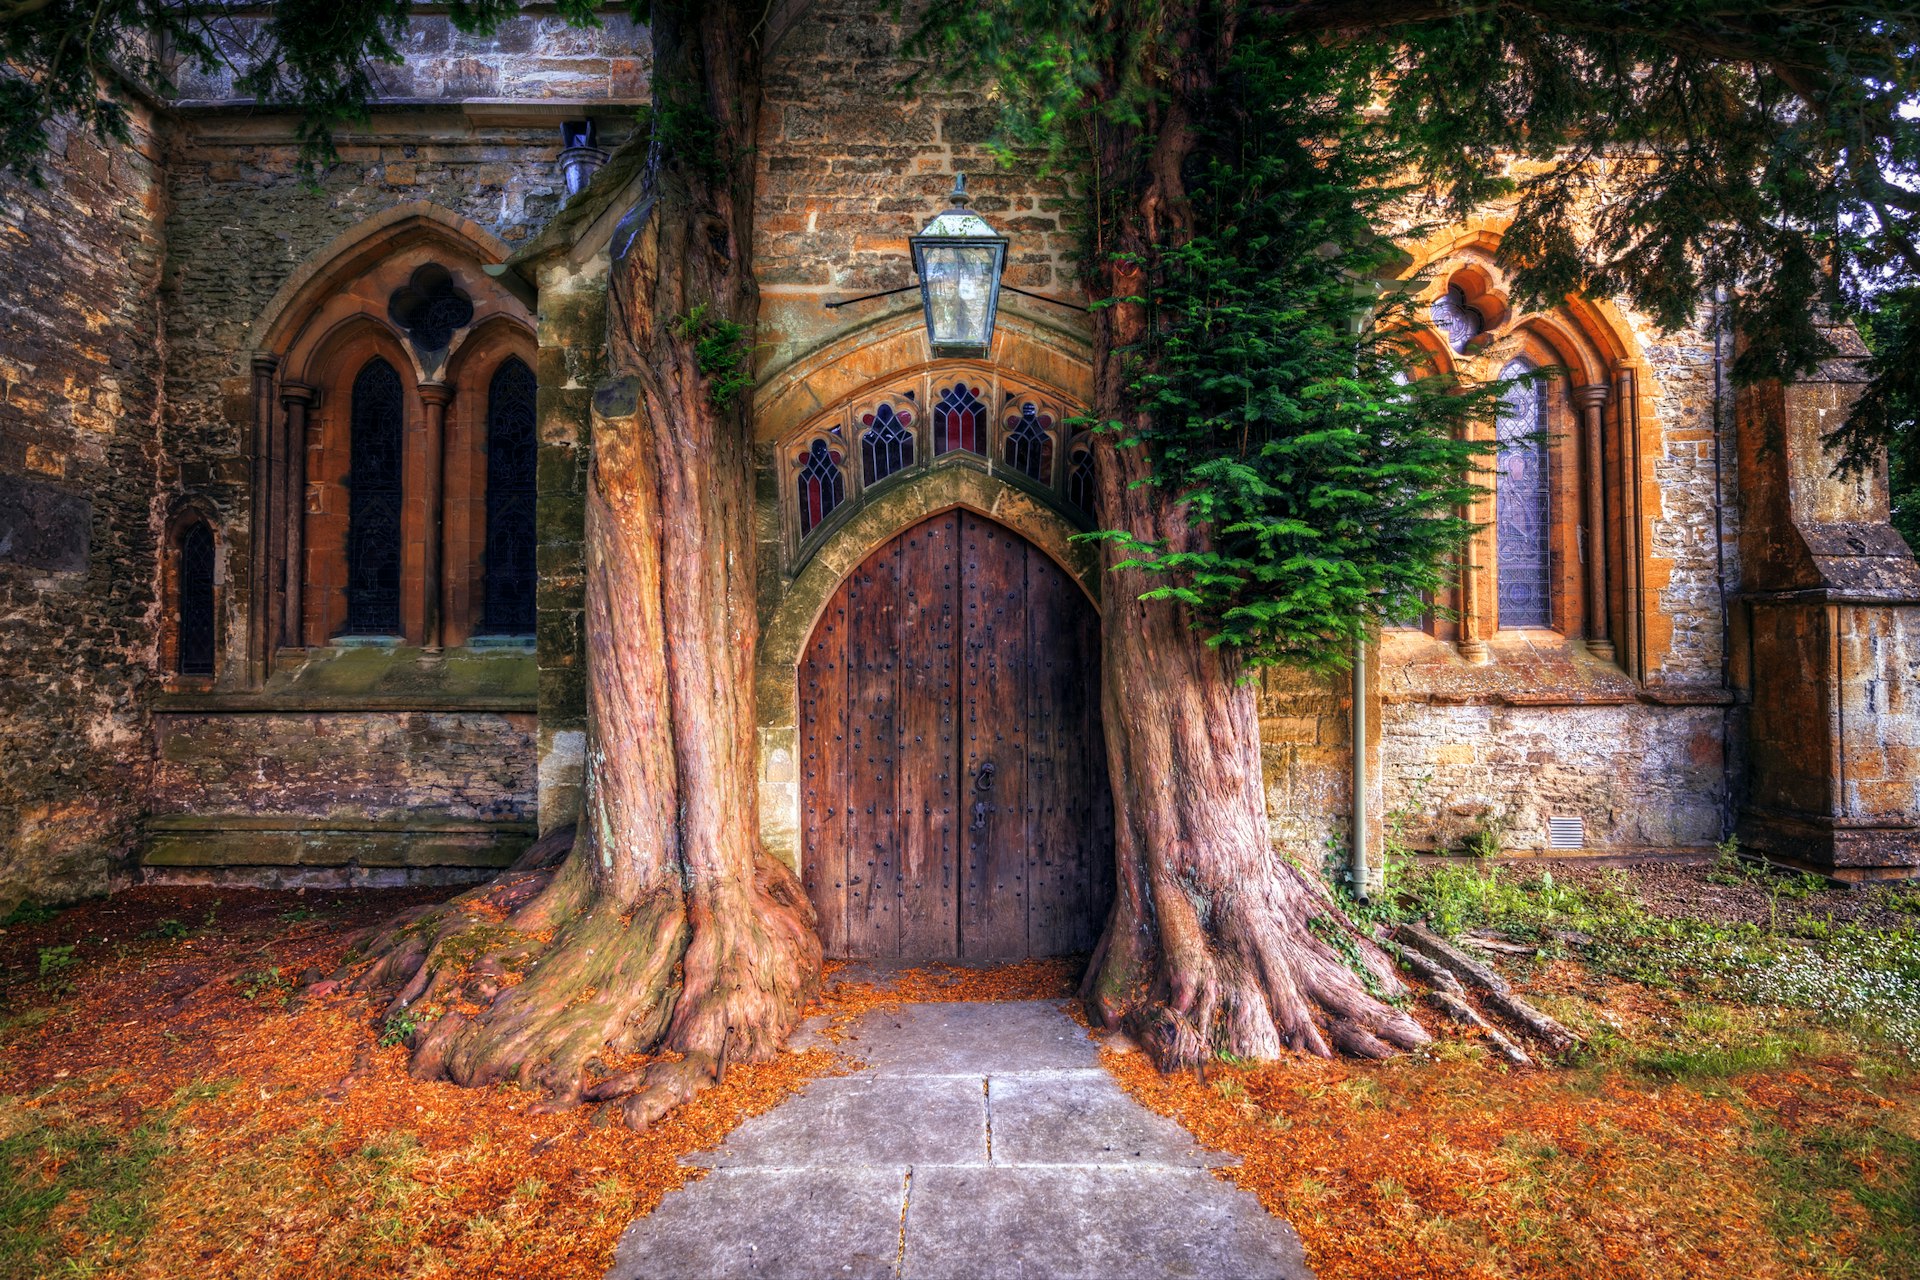 A church doorway framed by the trunks of two yew trees